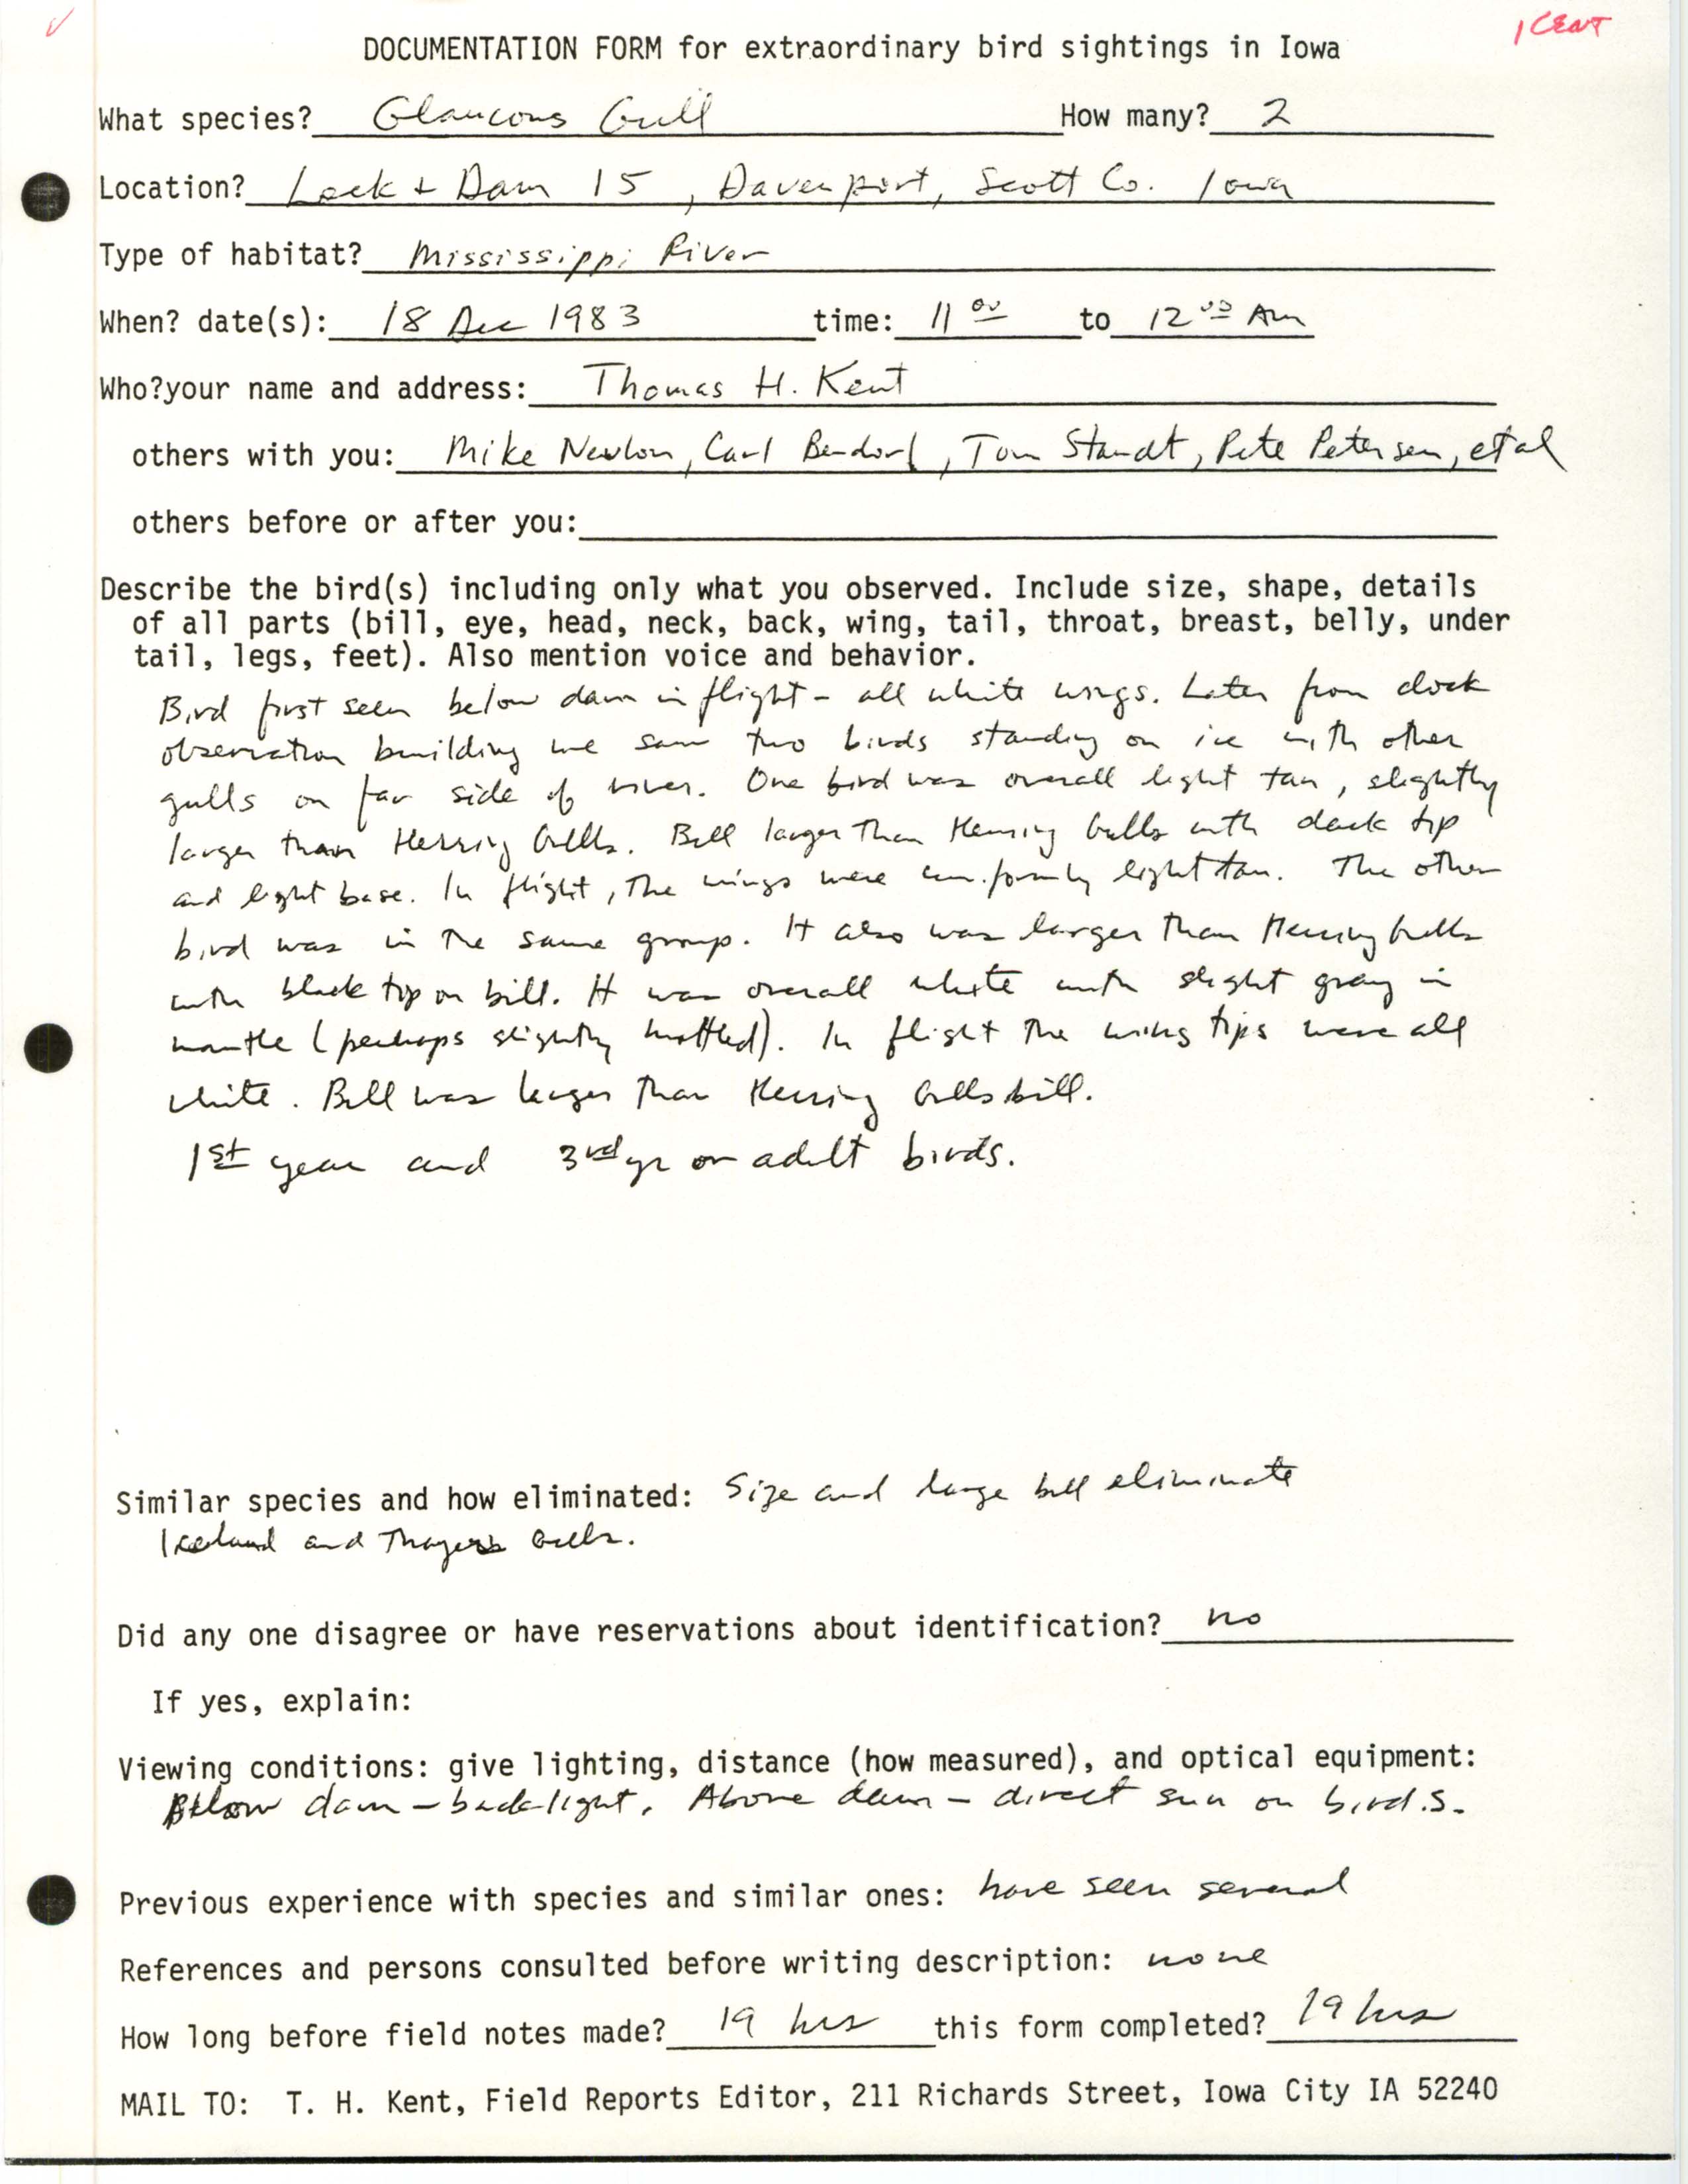 Rare bird documentation form for Glaucous Gull at Lock and Dam 15 at Davenport, 1983